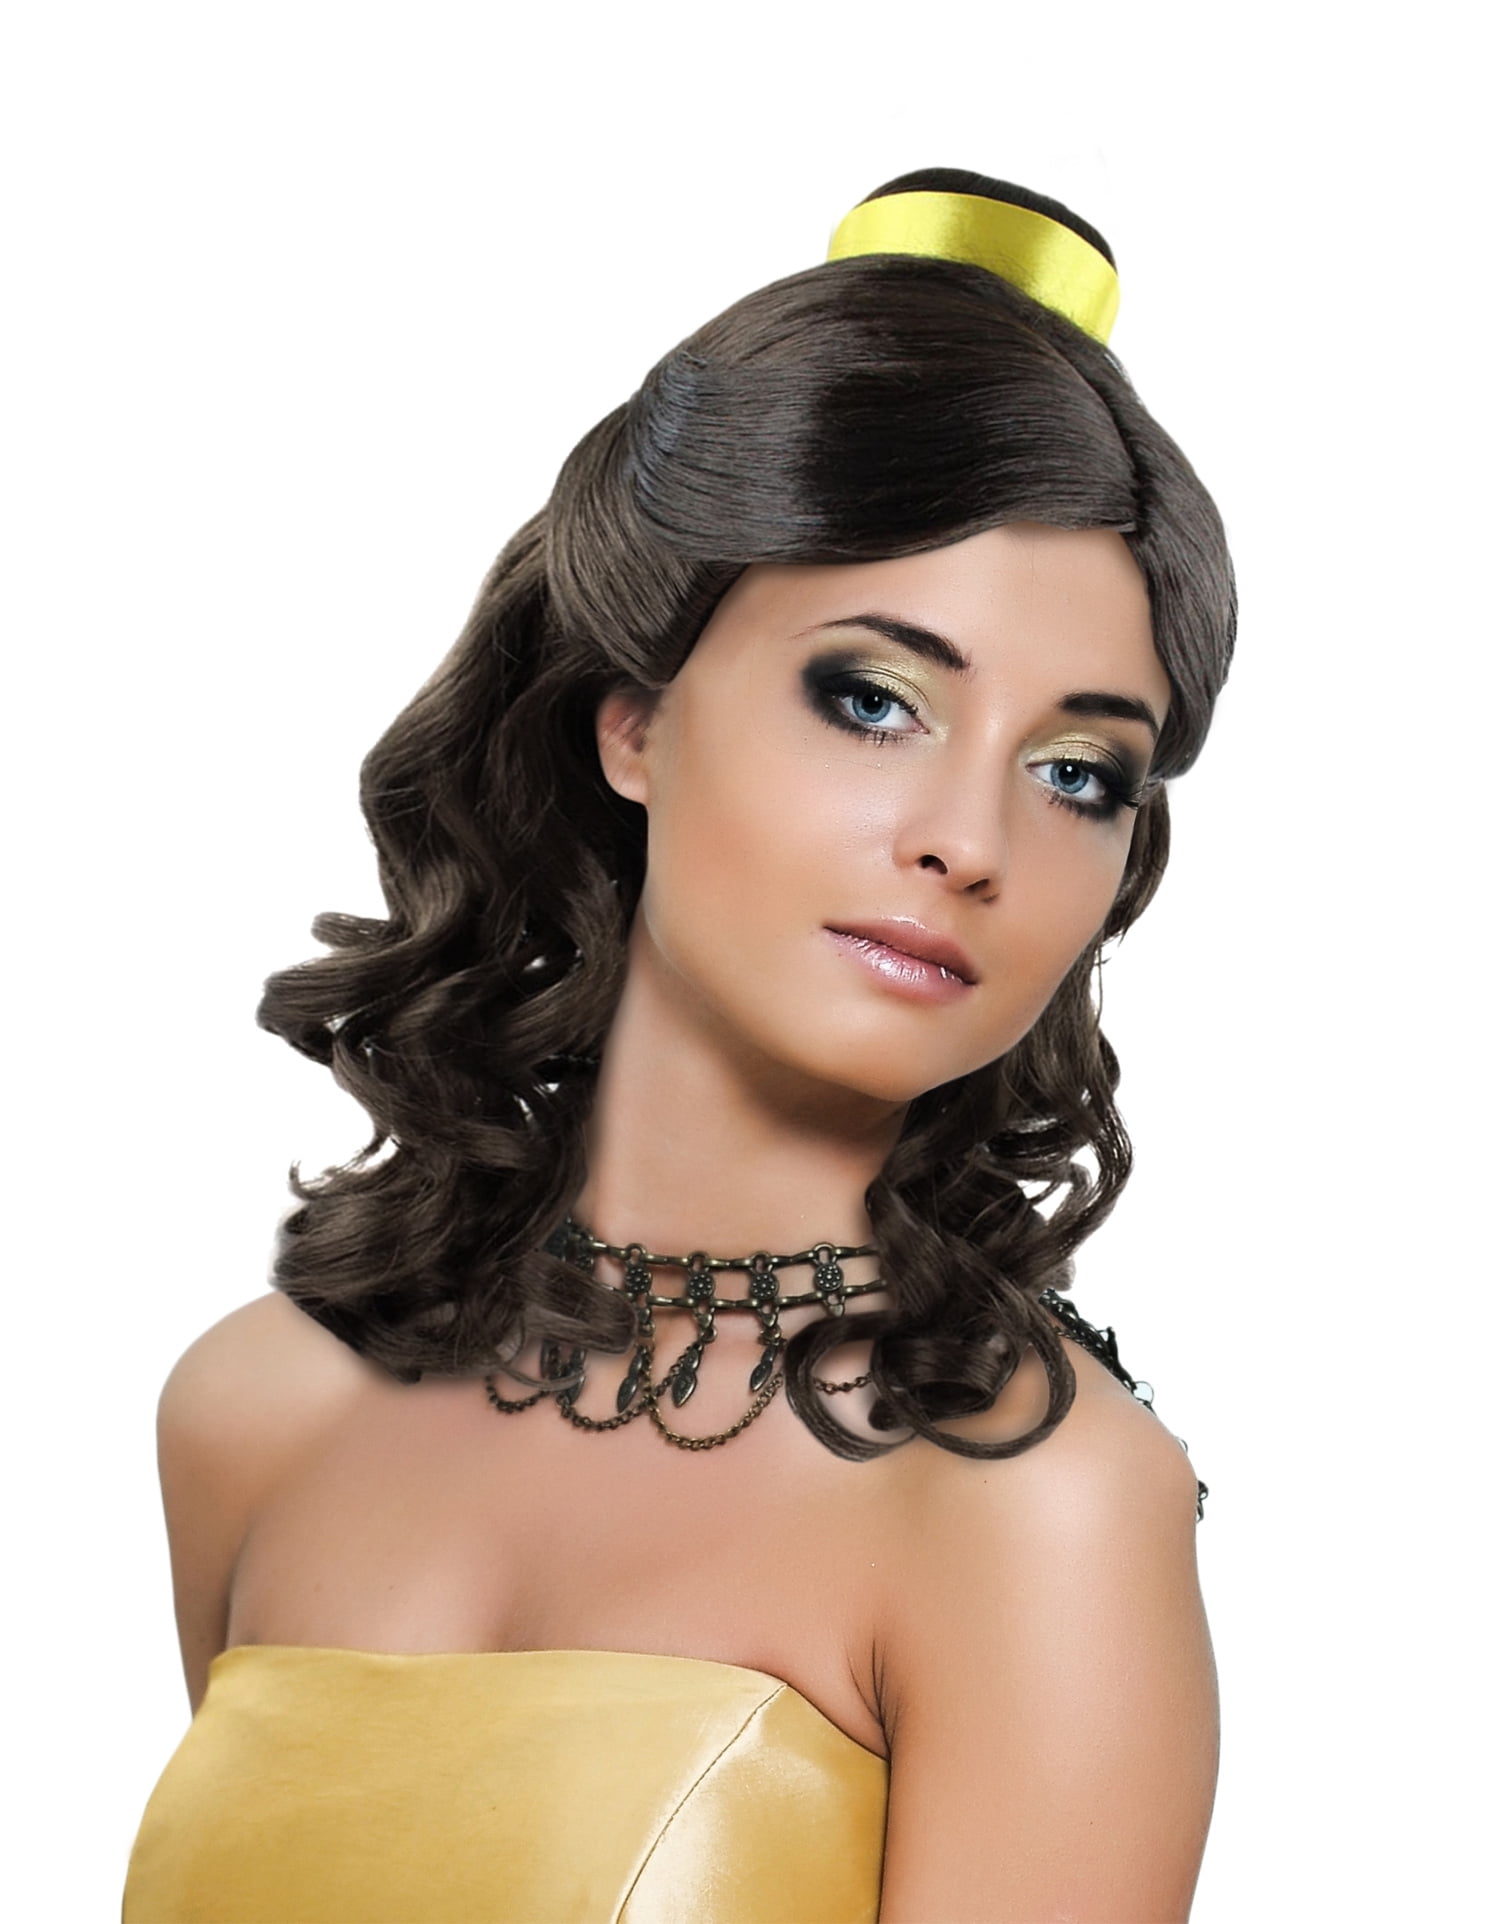 Princess Belle Wig Long Curly Wave Hair with Ribbon for Cosplay Costume  Party Dress Up Halloween (Dark Brown) 